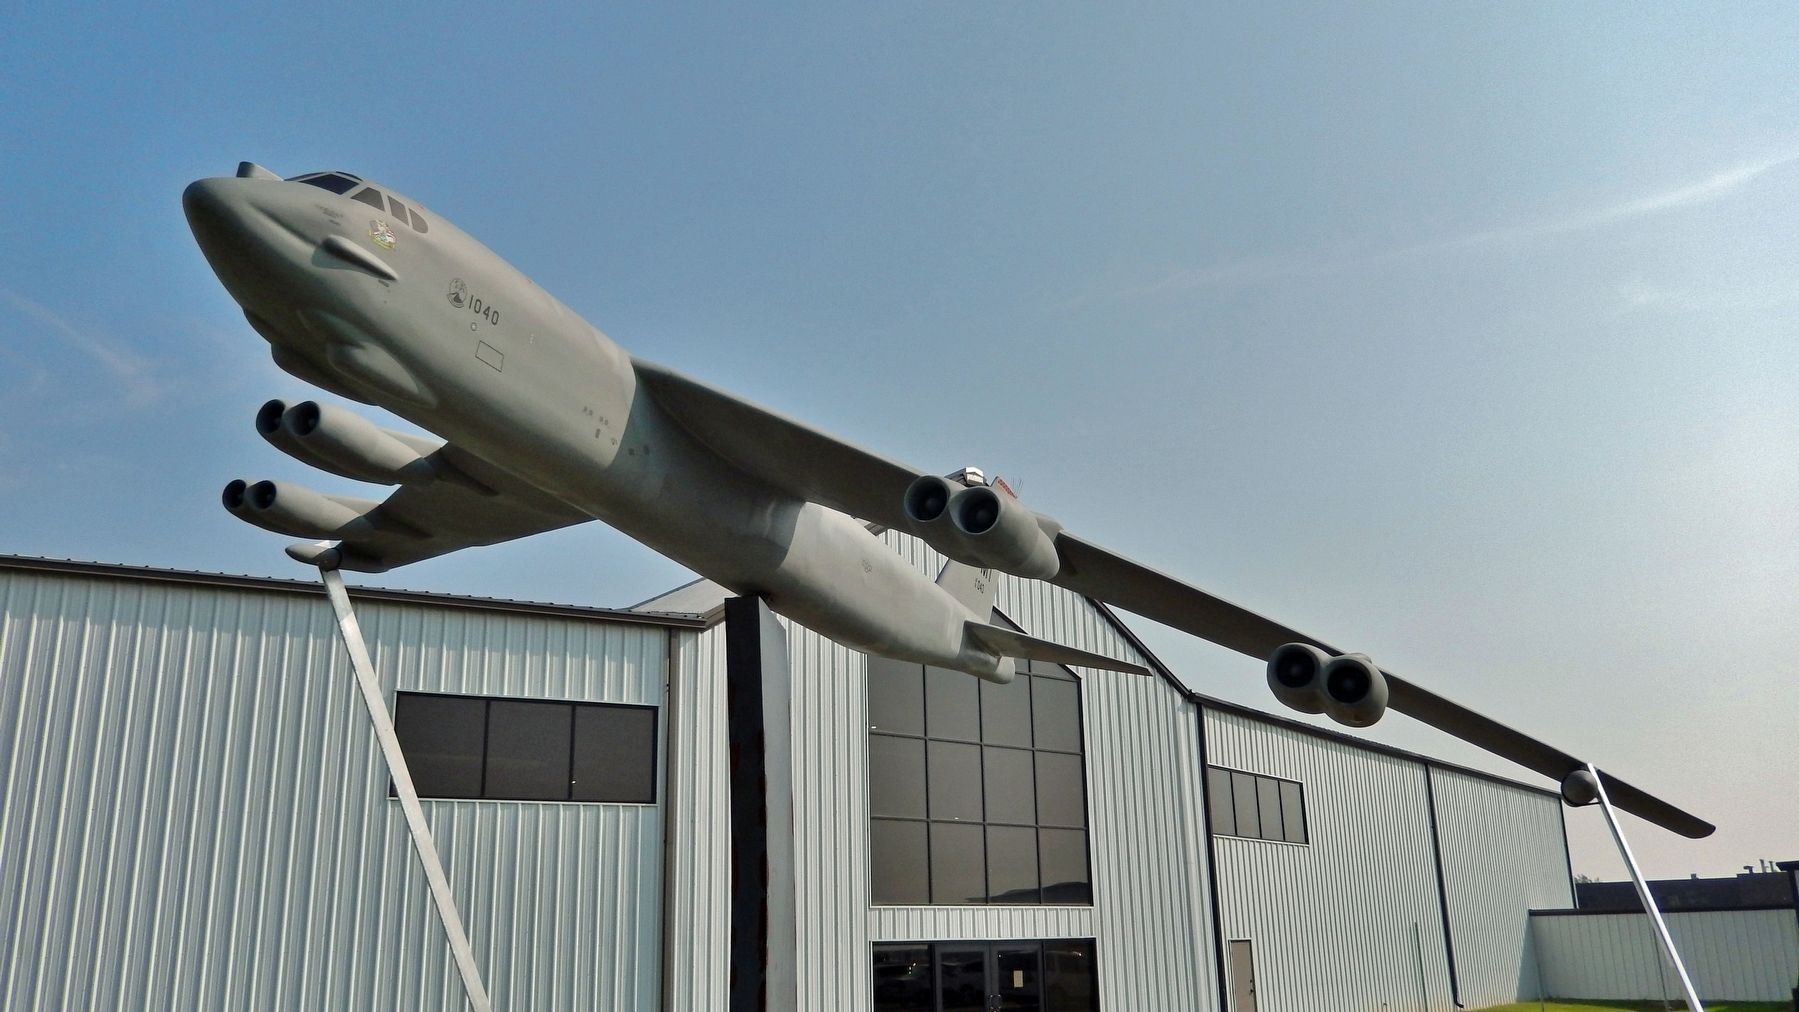 Boeing B-52 Stratofortress  1/8th Scale Model image. Click for full size.